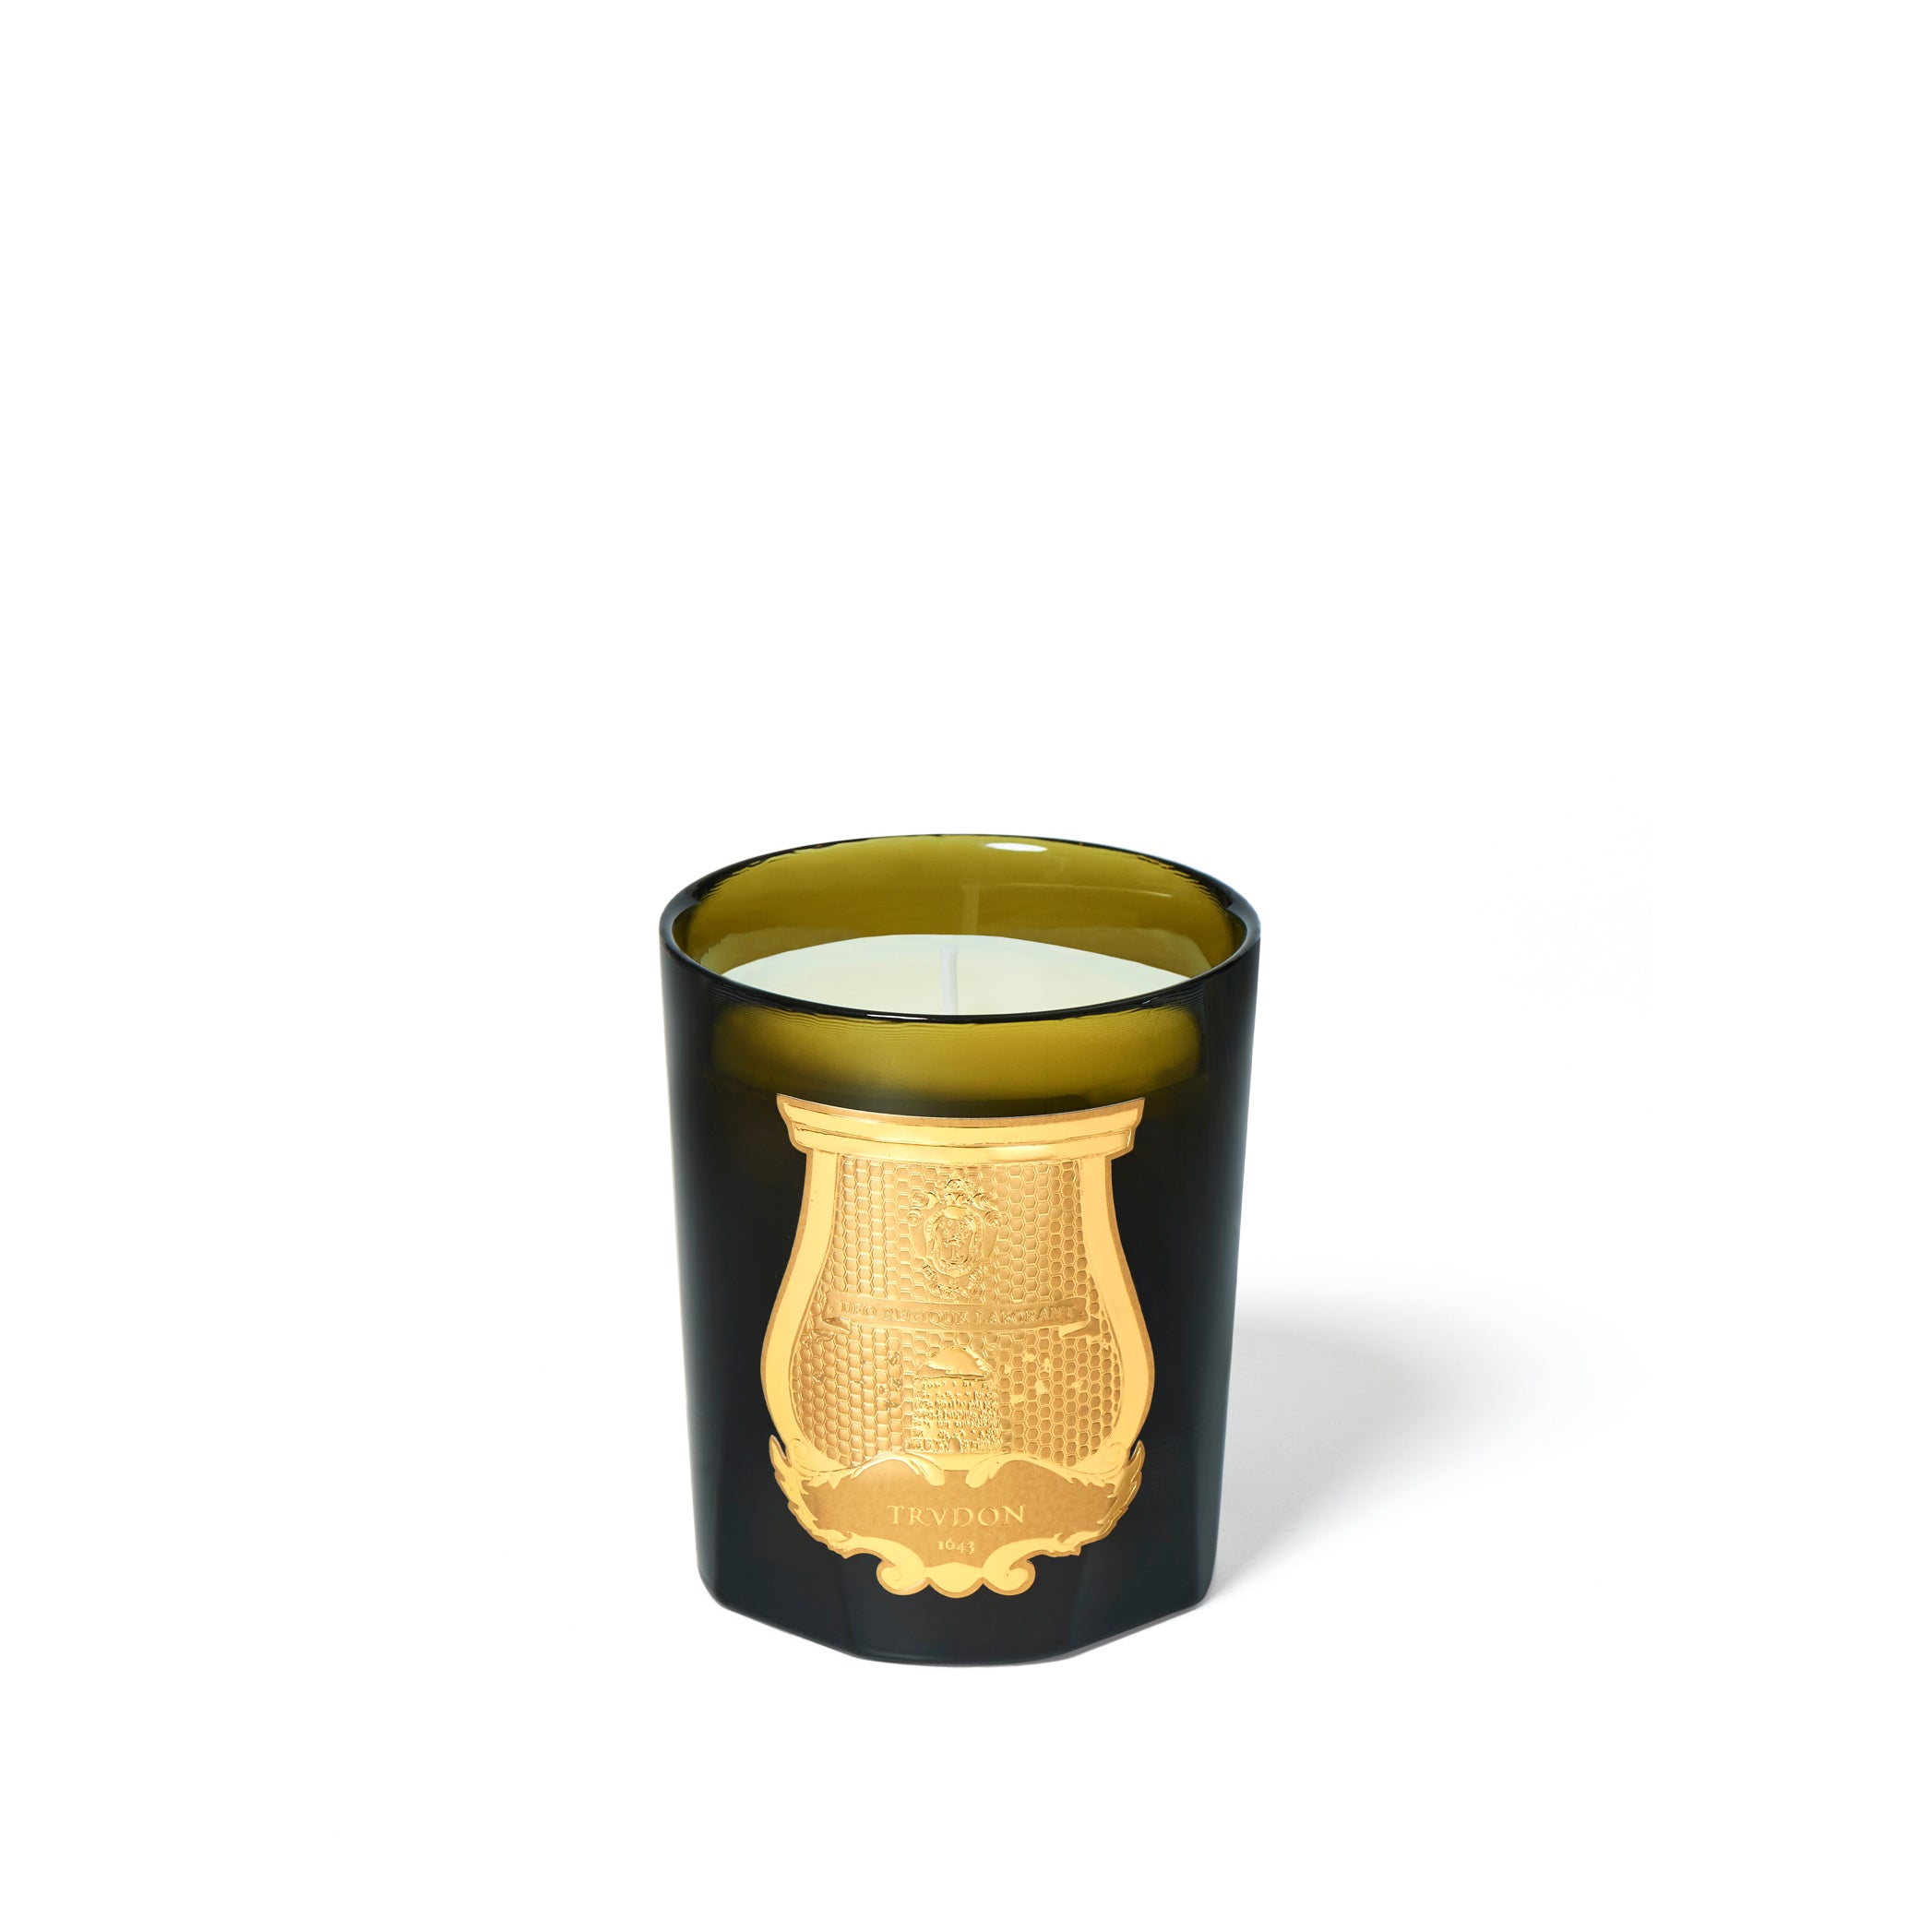 Classic Candle 'Cyrnos' by Trudon, 270g